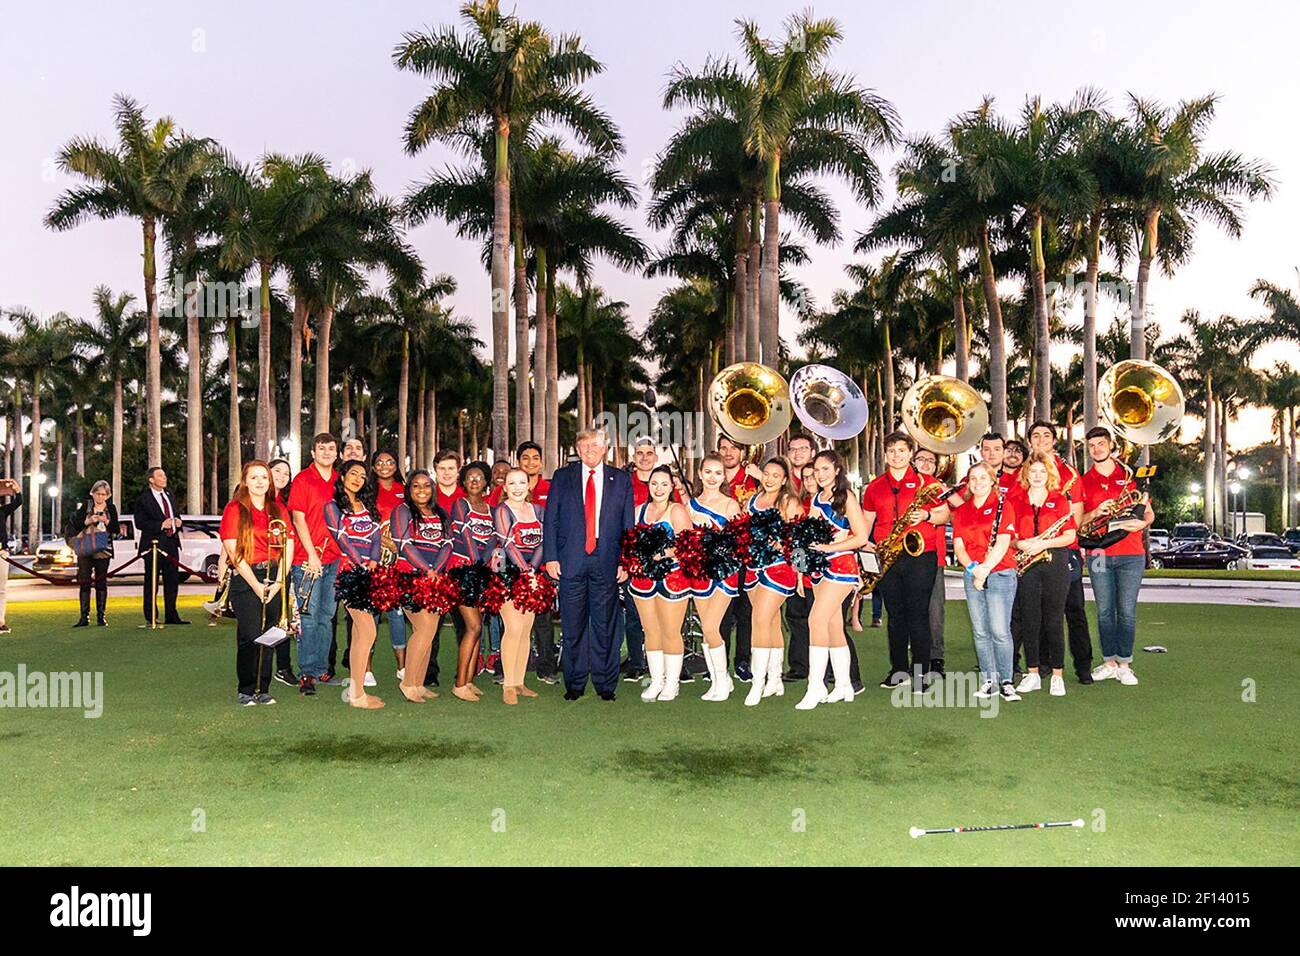 President Donald Trump poses for a photo with members of the Florida Atlantic University marching band Sunday evening Feb. 2 2020 outside the Trump International Golf Club in West Palm Beach Fla. prior to attending a Super Bowl party. Stock Photo